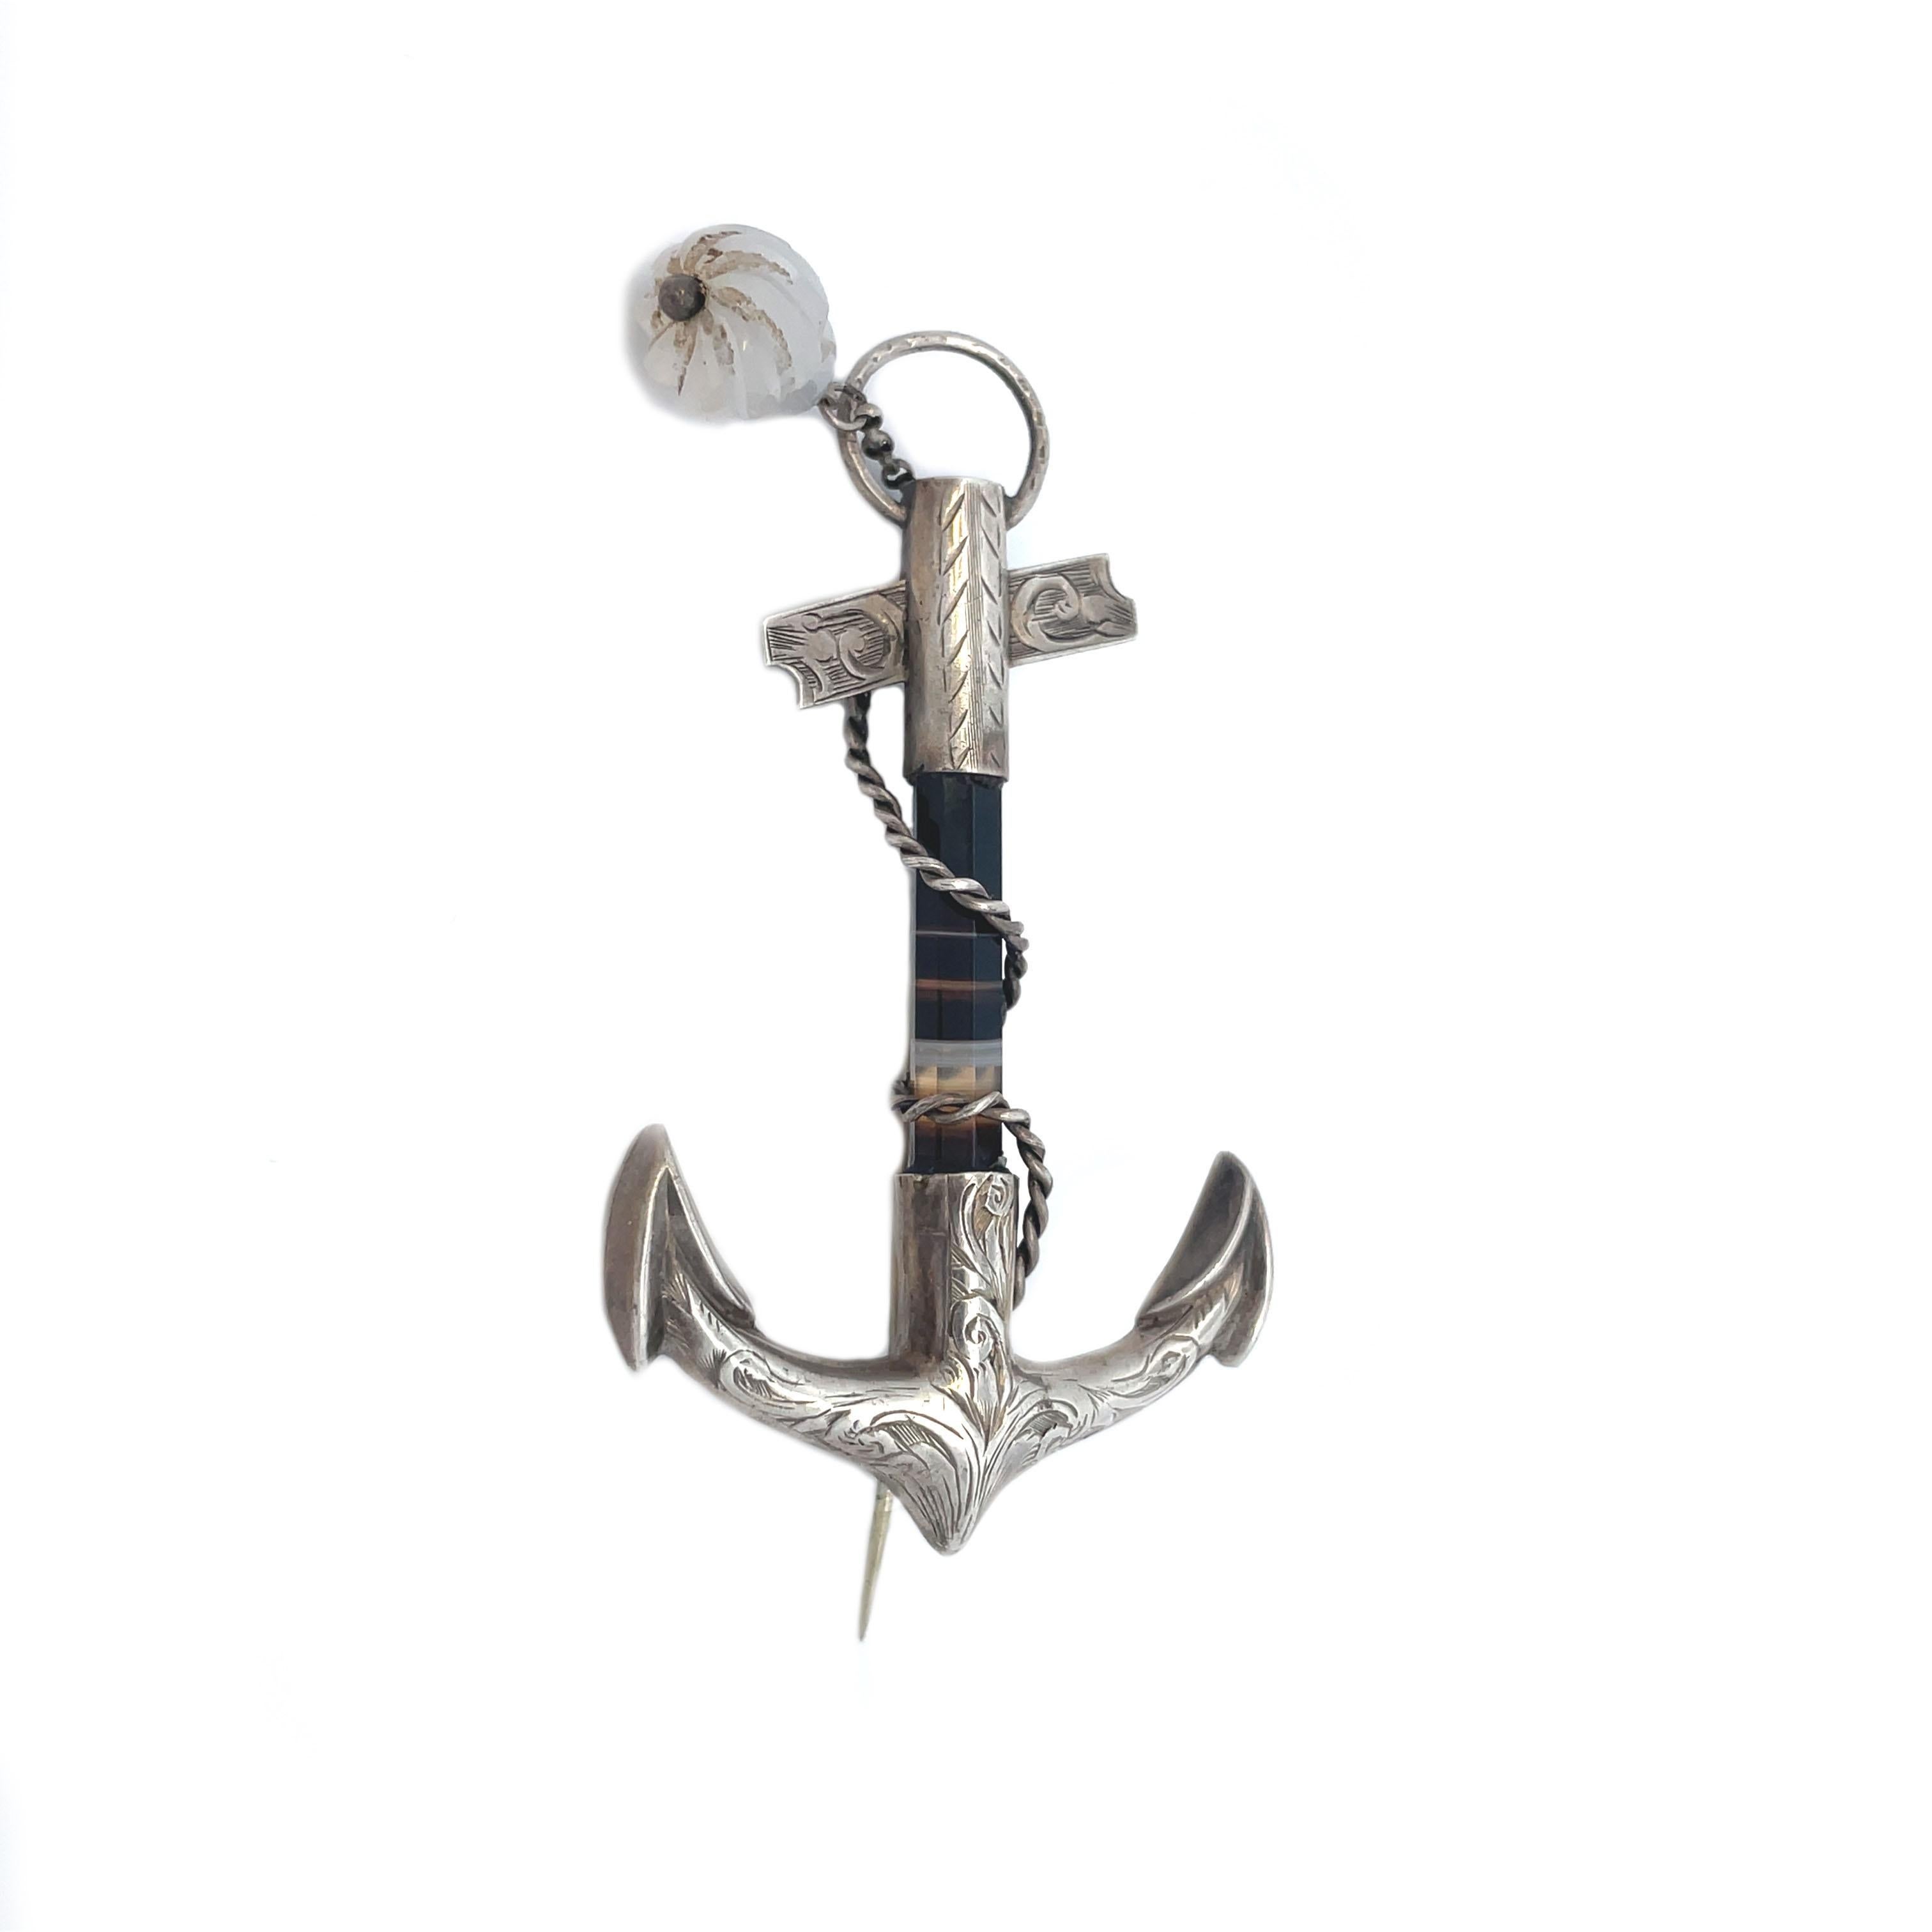 This is a unique 1880 Victorian anchor pin crafted in Sterling Silver and set with Scottish Agate in the center. A stunning antique anchor brooch with a gorgeous banded agate & silver top and ends with hand engraved detailing. Anchors were